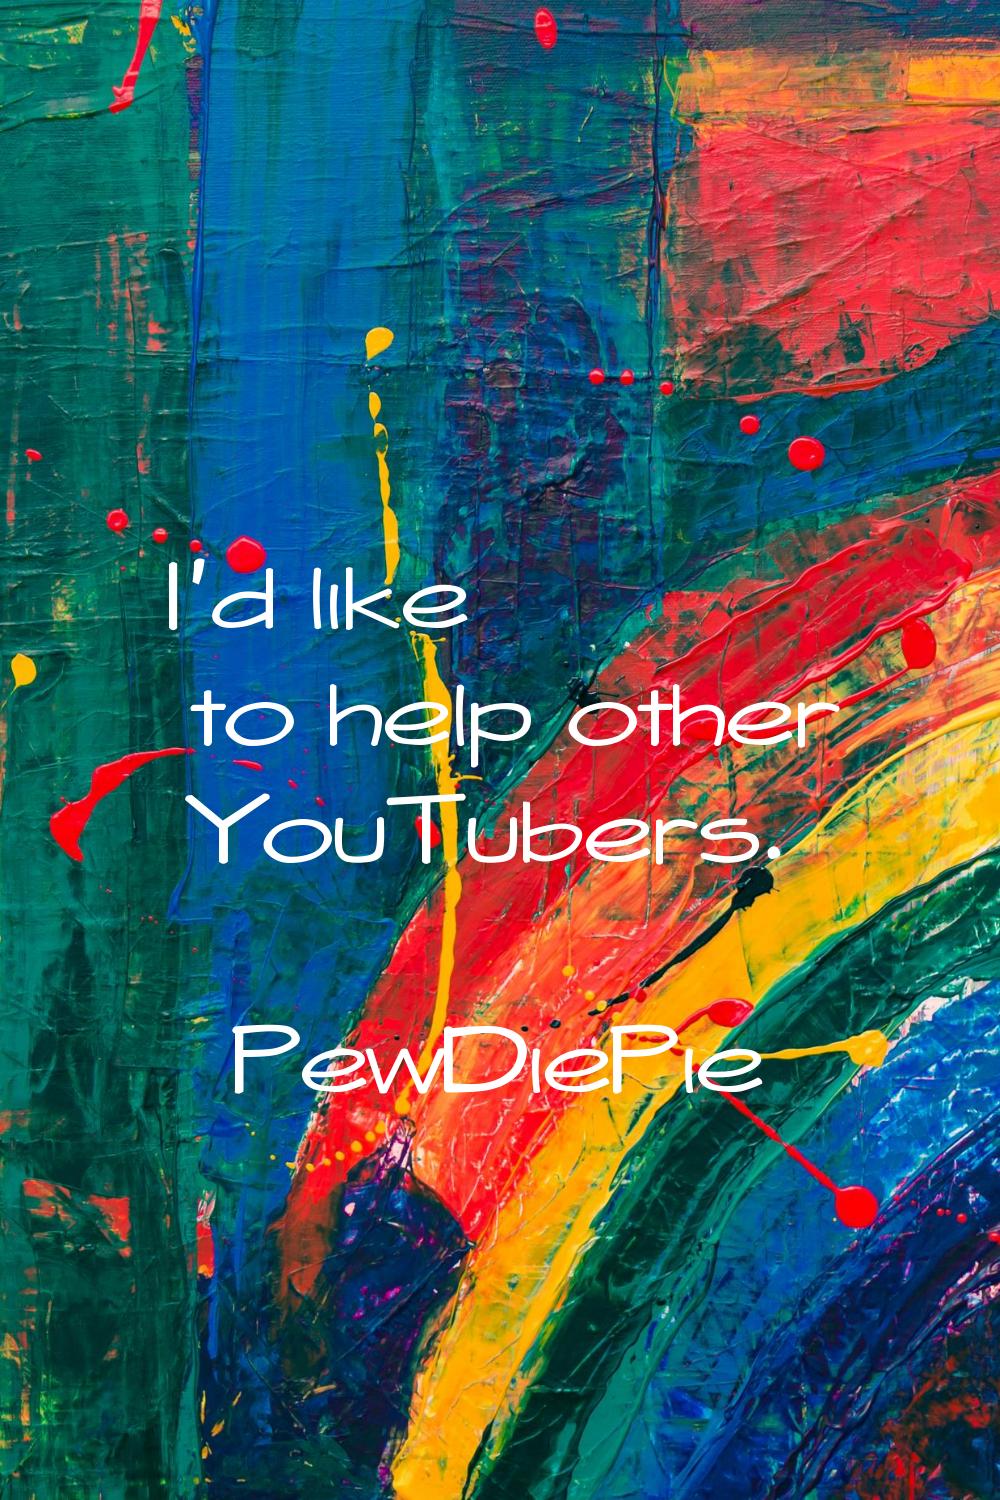 I'd like to help other YouTubers.